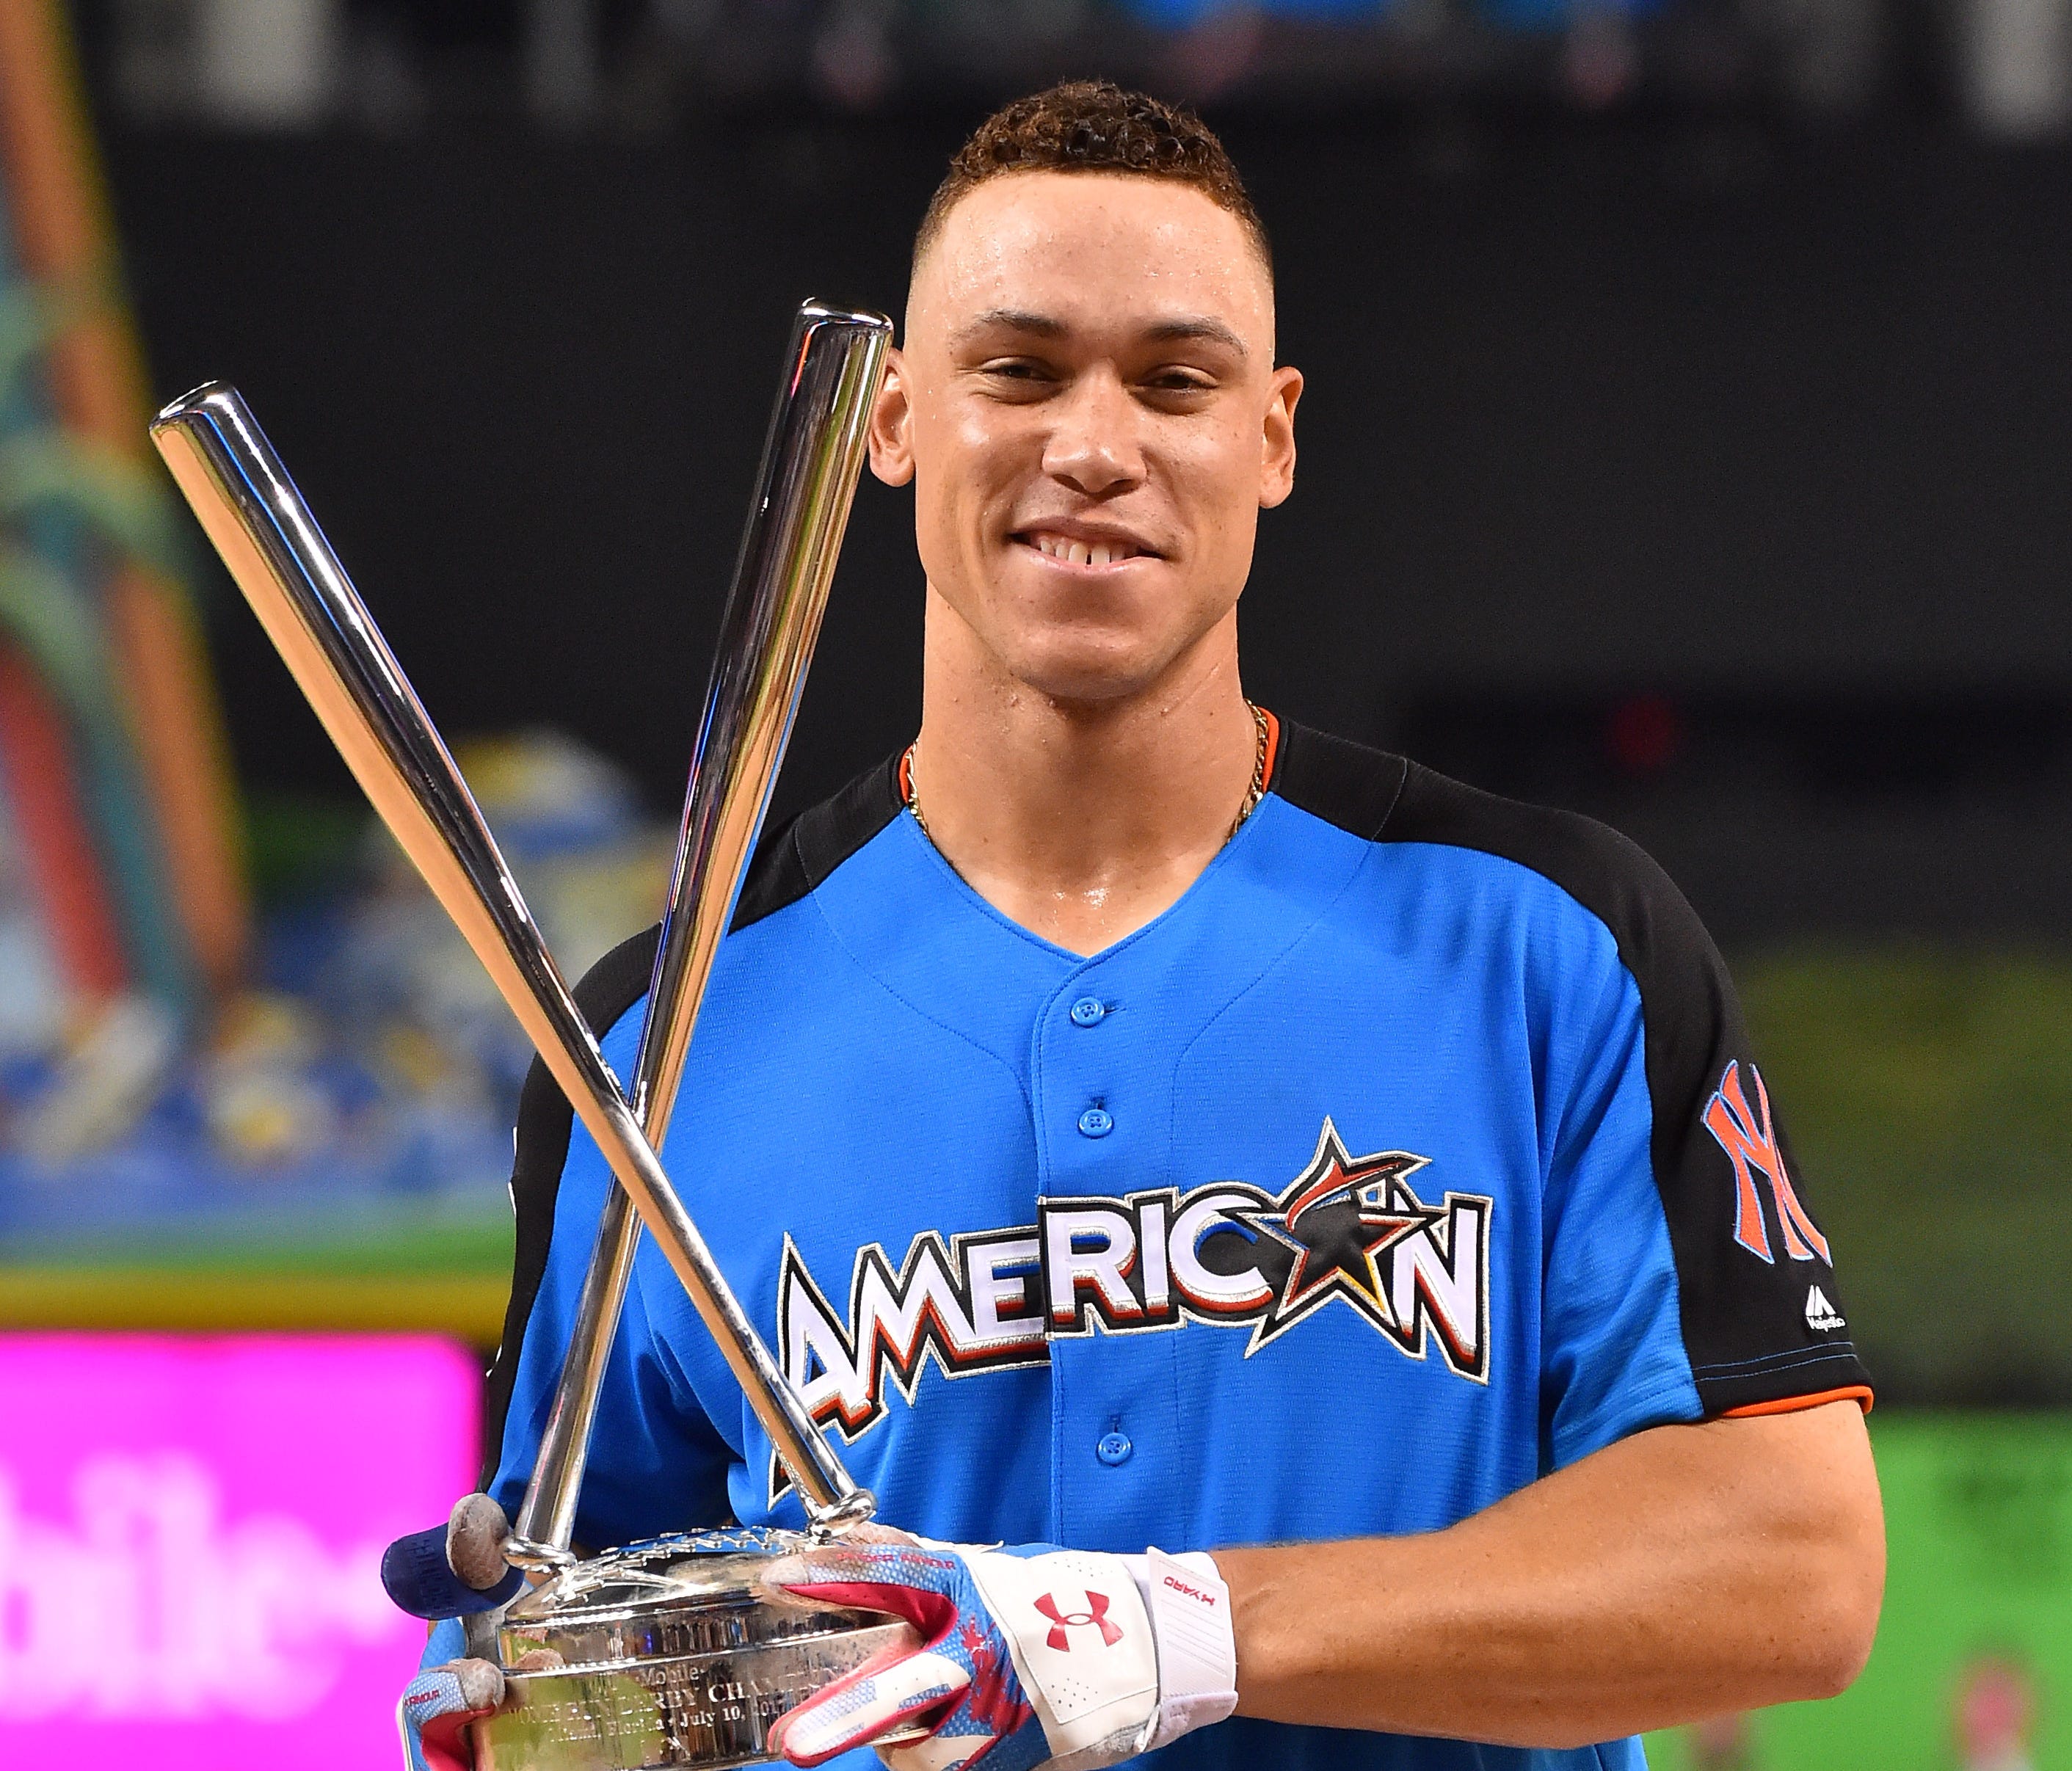 Aaron Judge holds up the trophy after winning the 2017 MLB Home Run Derby at Marlins Park.